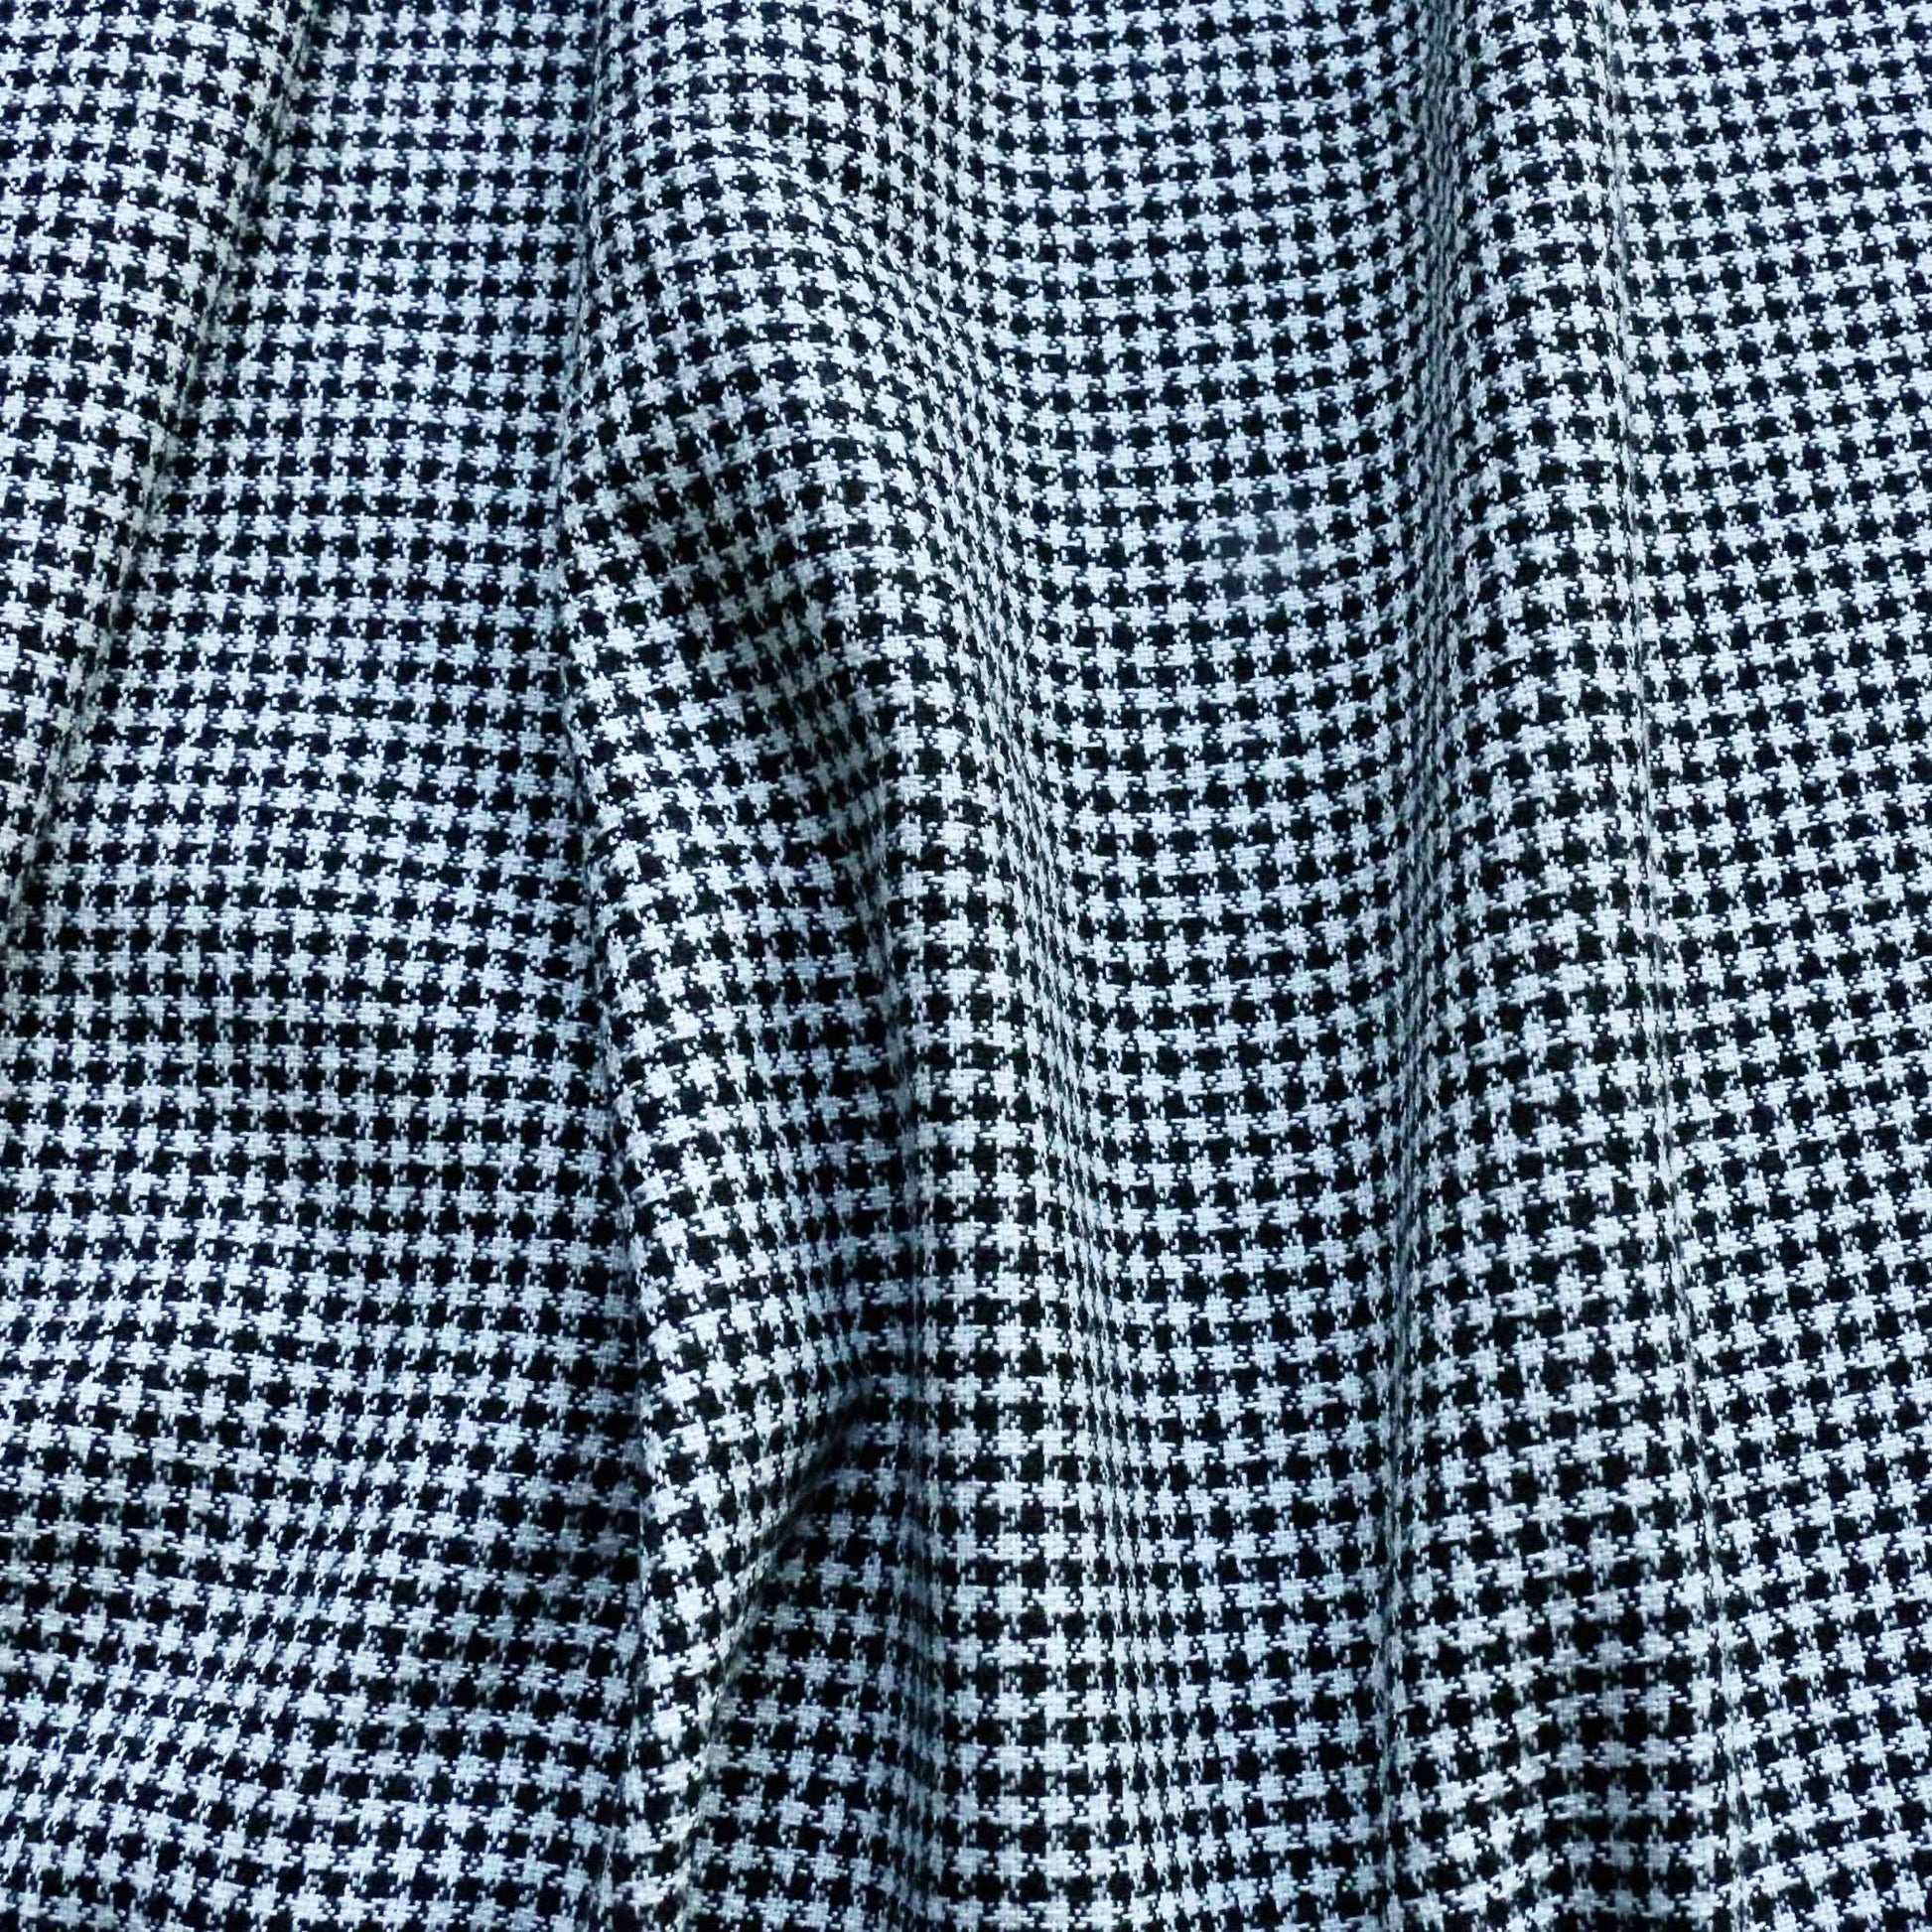 viscose check patterned dressmaking fabric in black and white colours